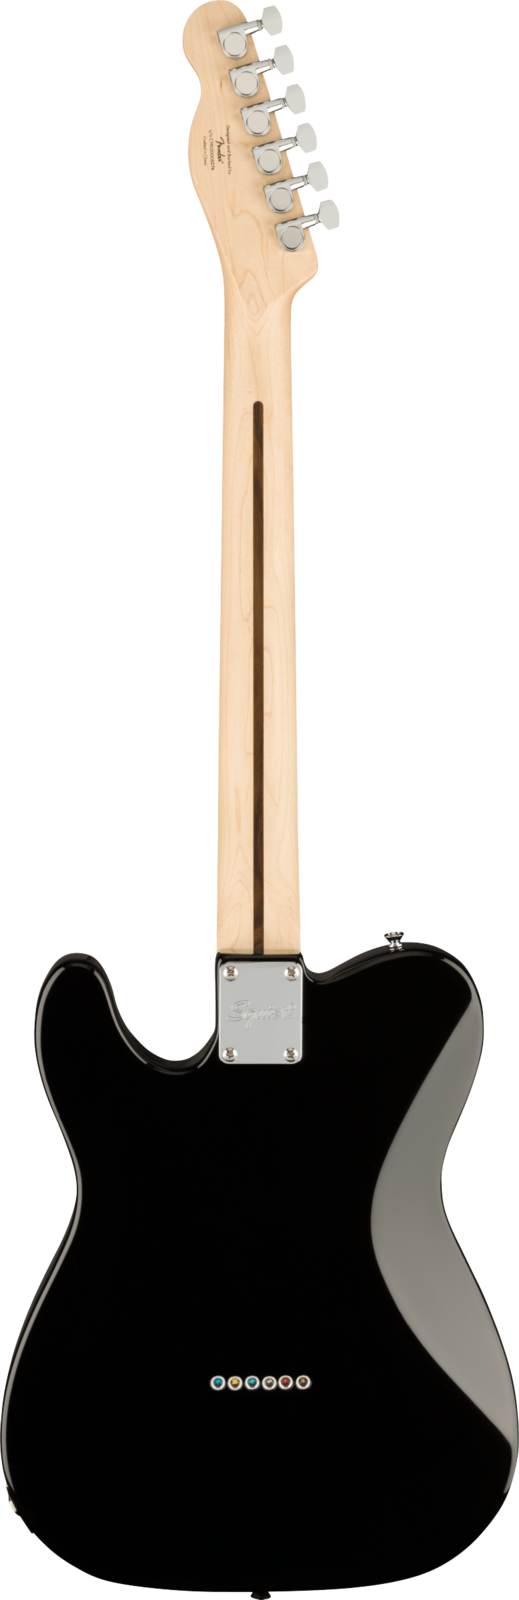 Squier Affinity Telecaster Deluxe Black